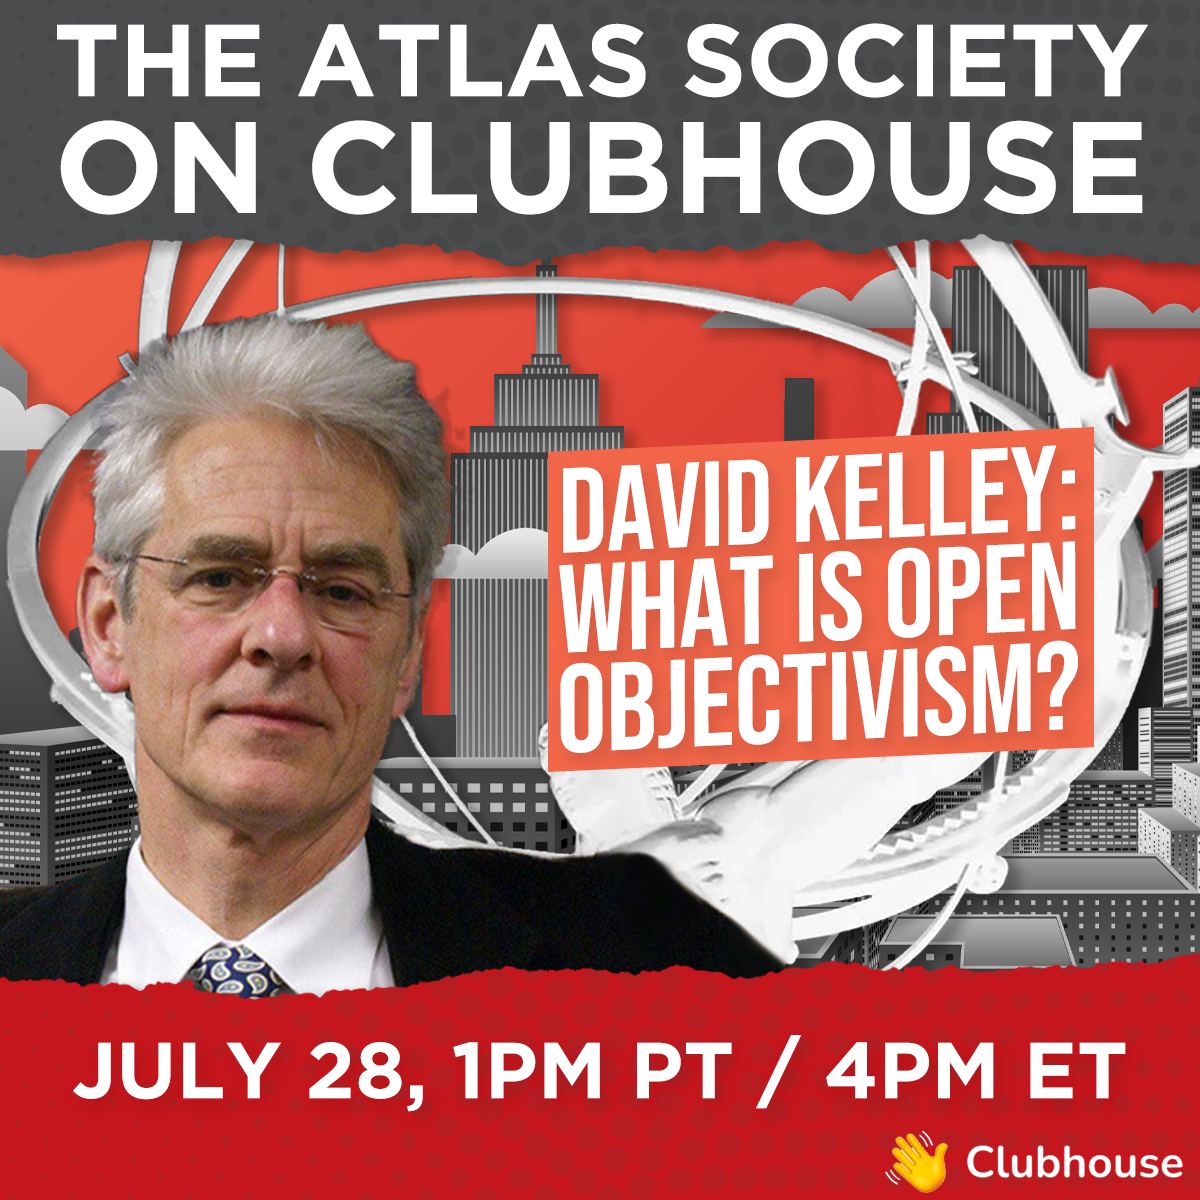 David Kelley - What is Open Objectivism?